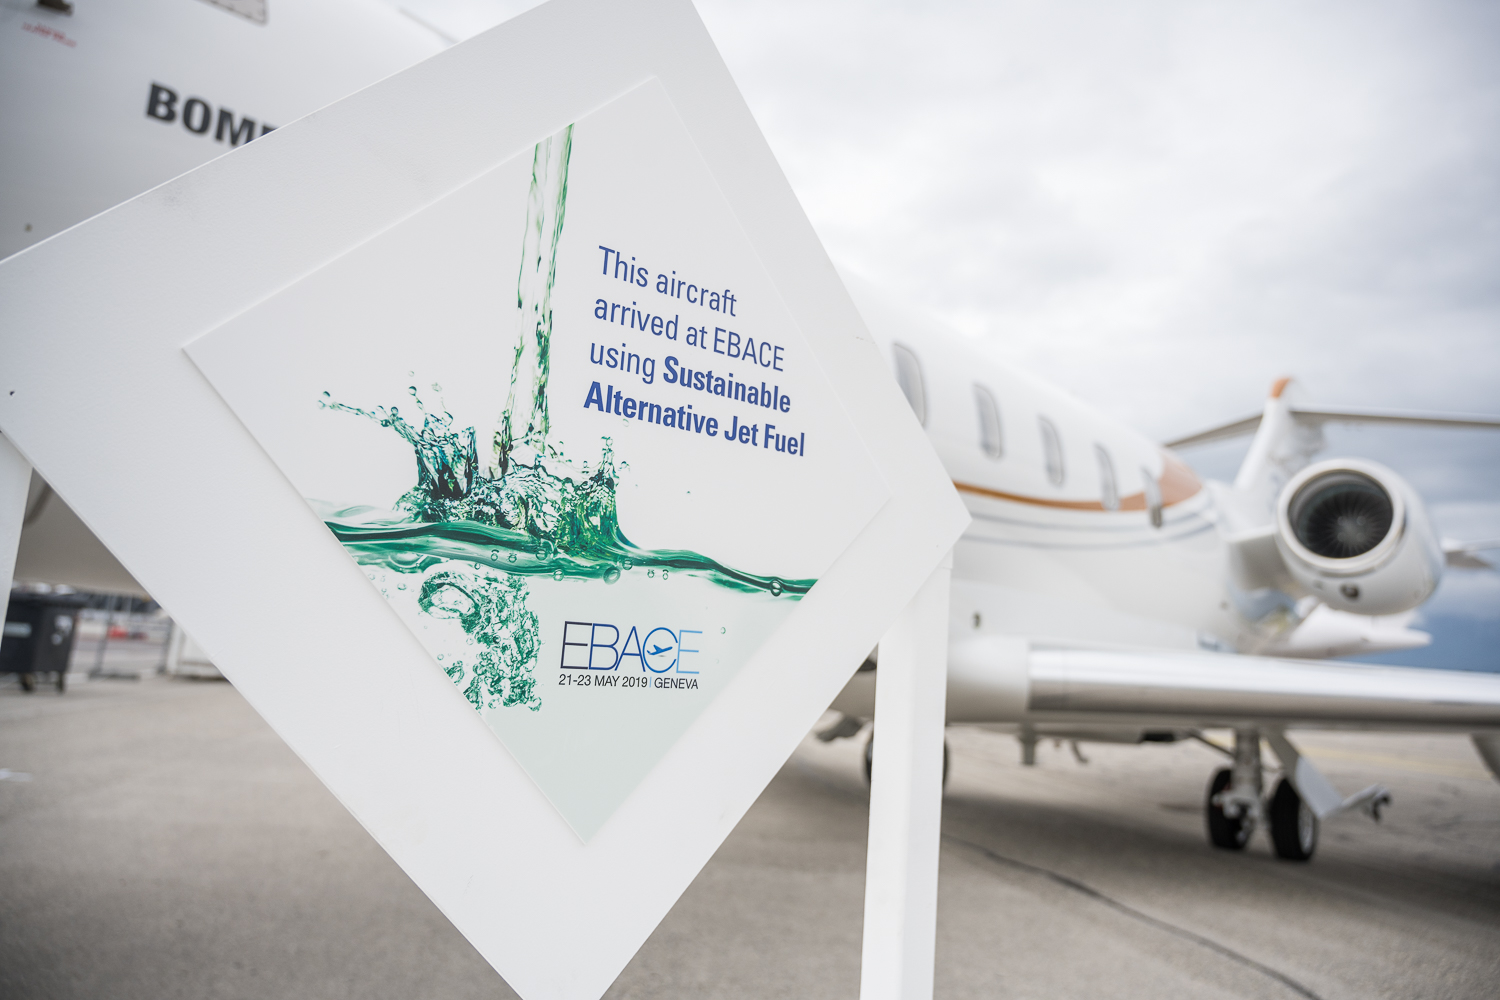 Fuelling the Future: The Sustainable Alternative Jet Fuels Initiative